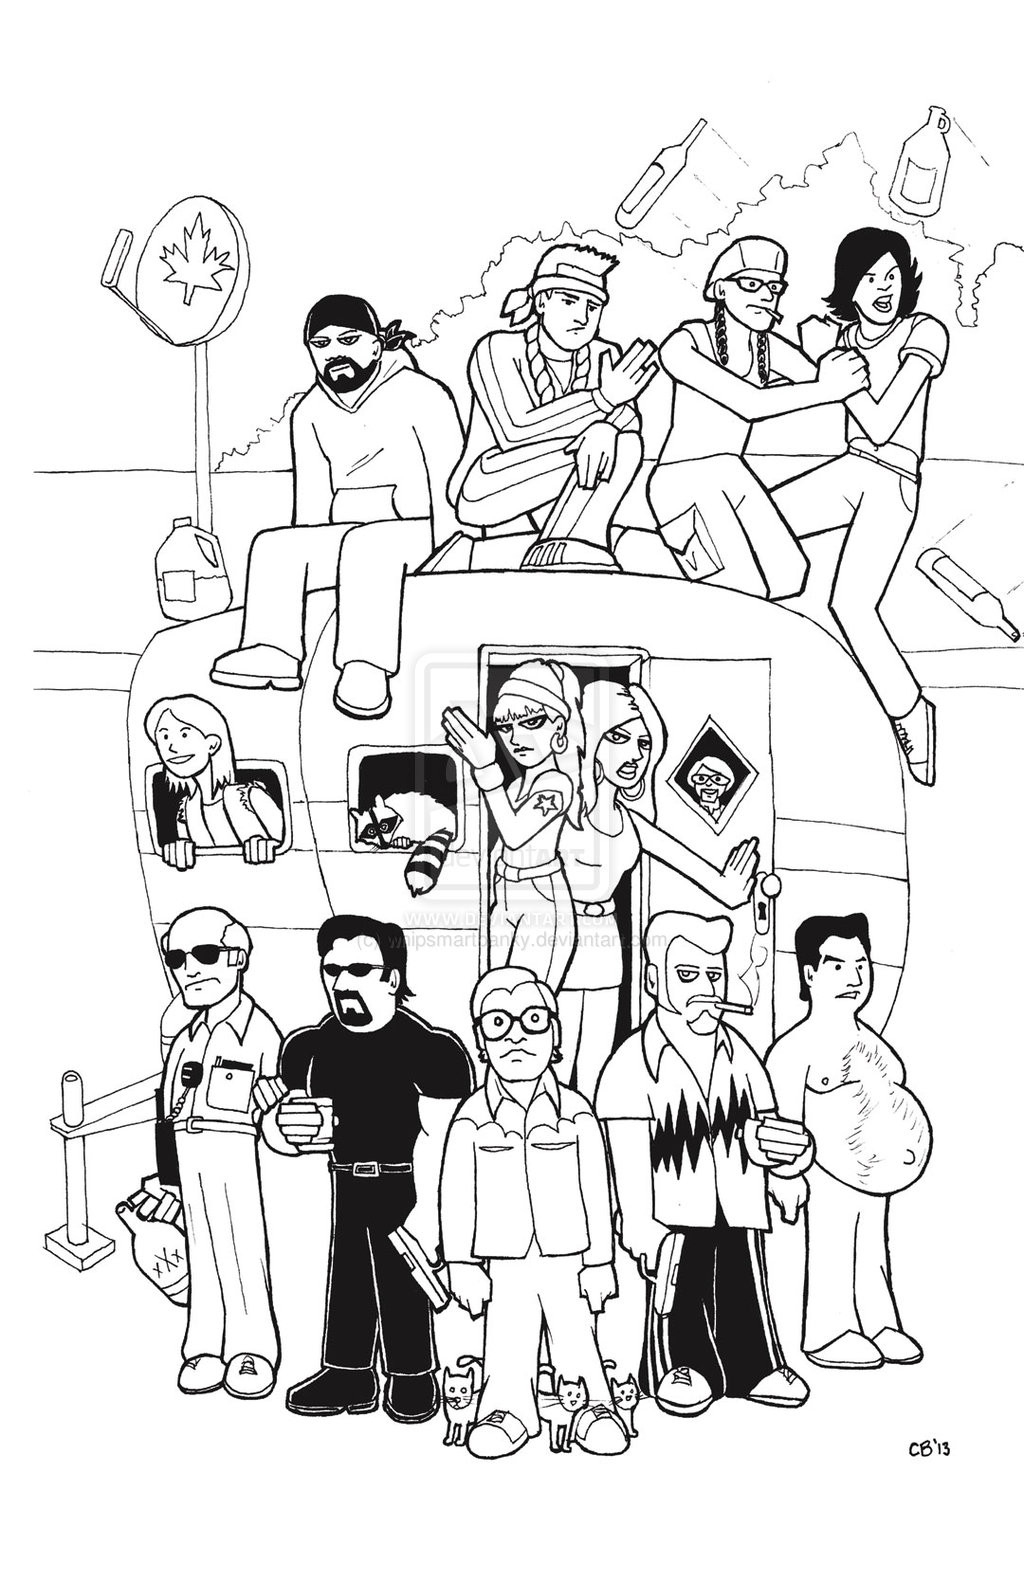 Trailer Park Boys Coloring Pages
 Trailer Park Boys by whipsmartbanky on DeviantArt